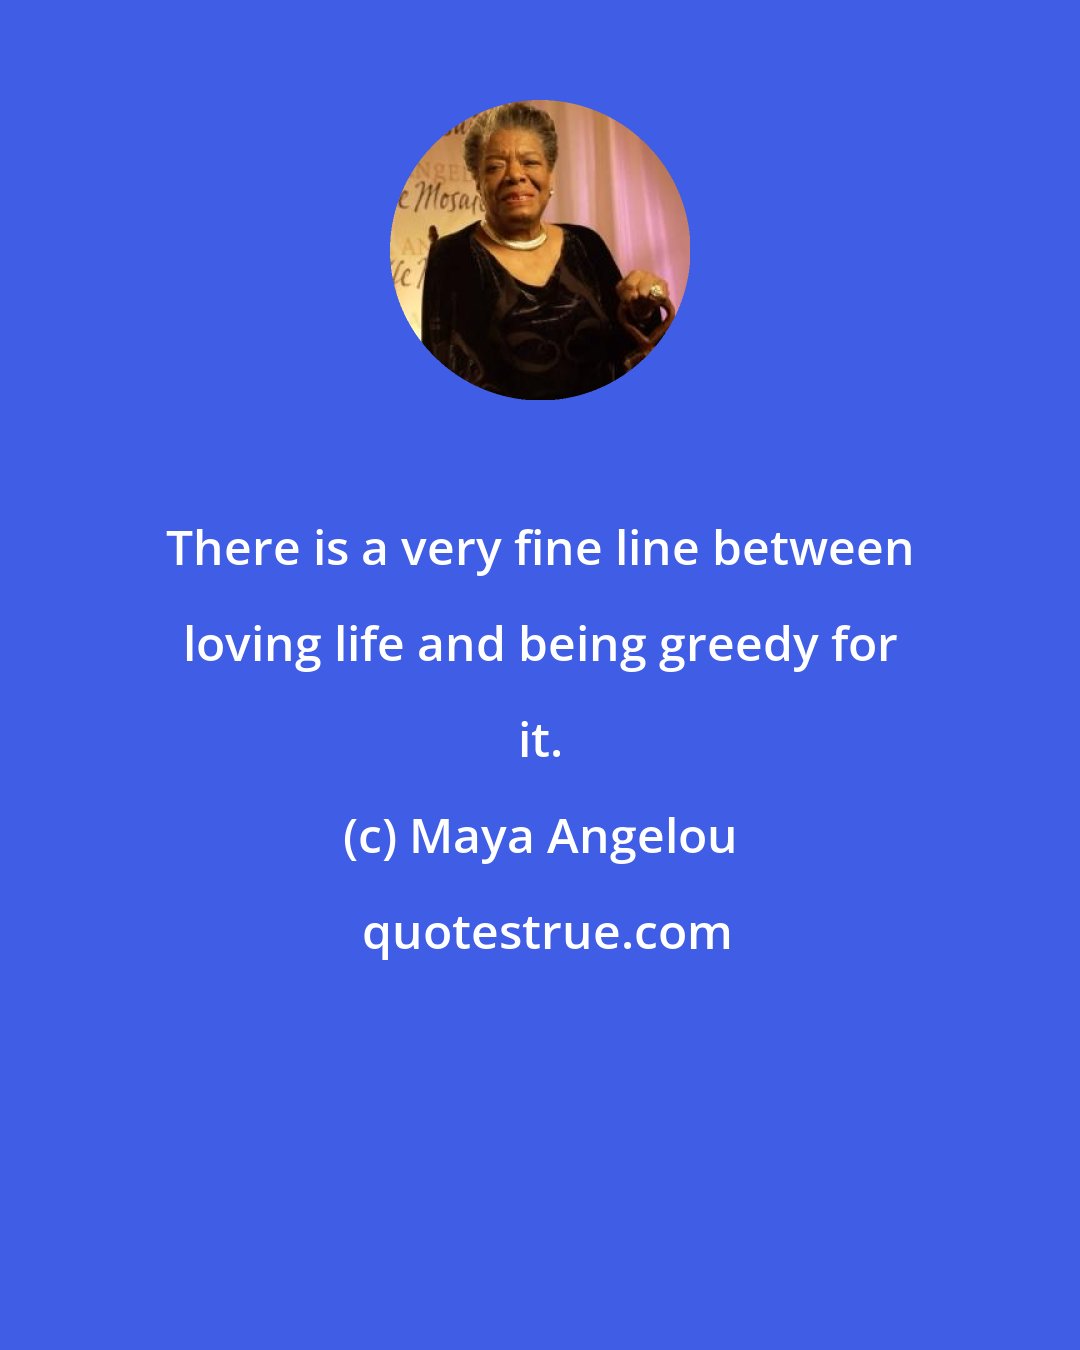 Maya Angelou: There is a very fine line between loving life and being greedy for it.